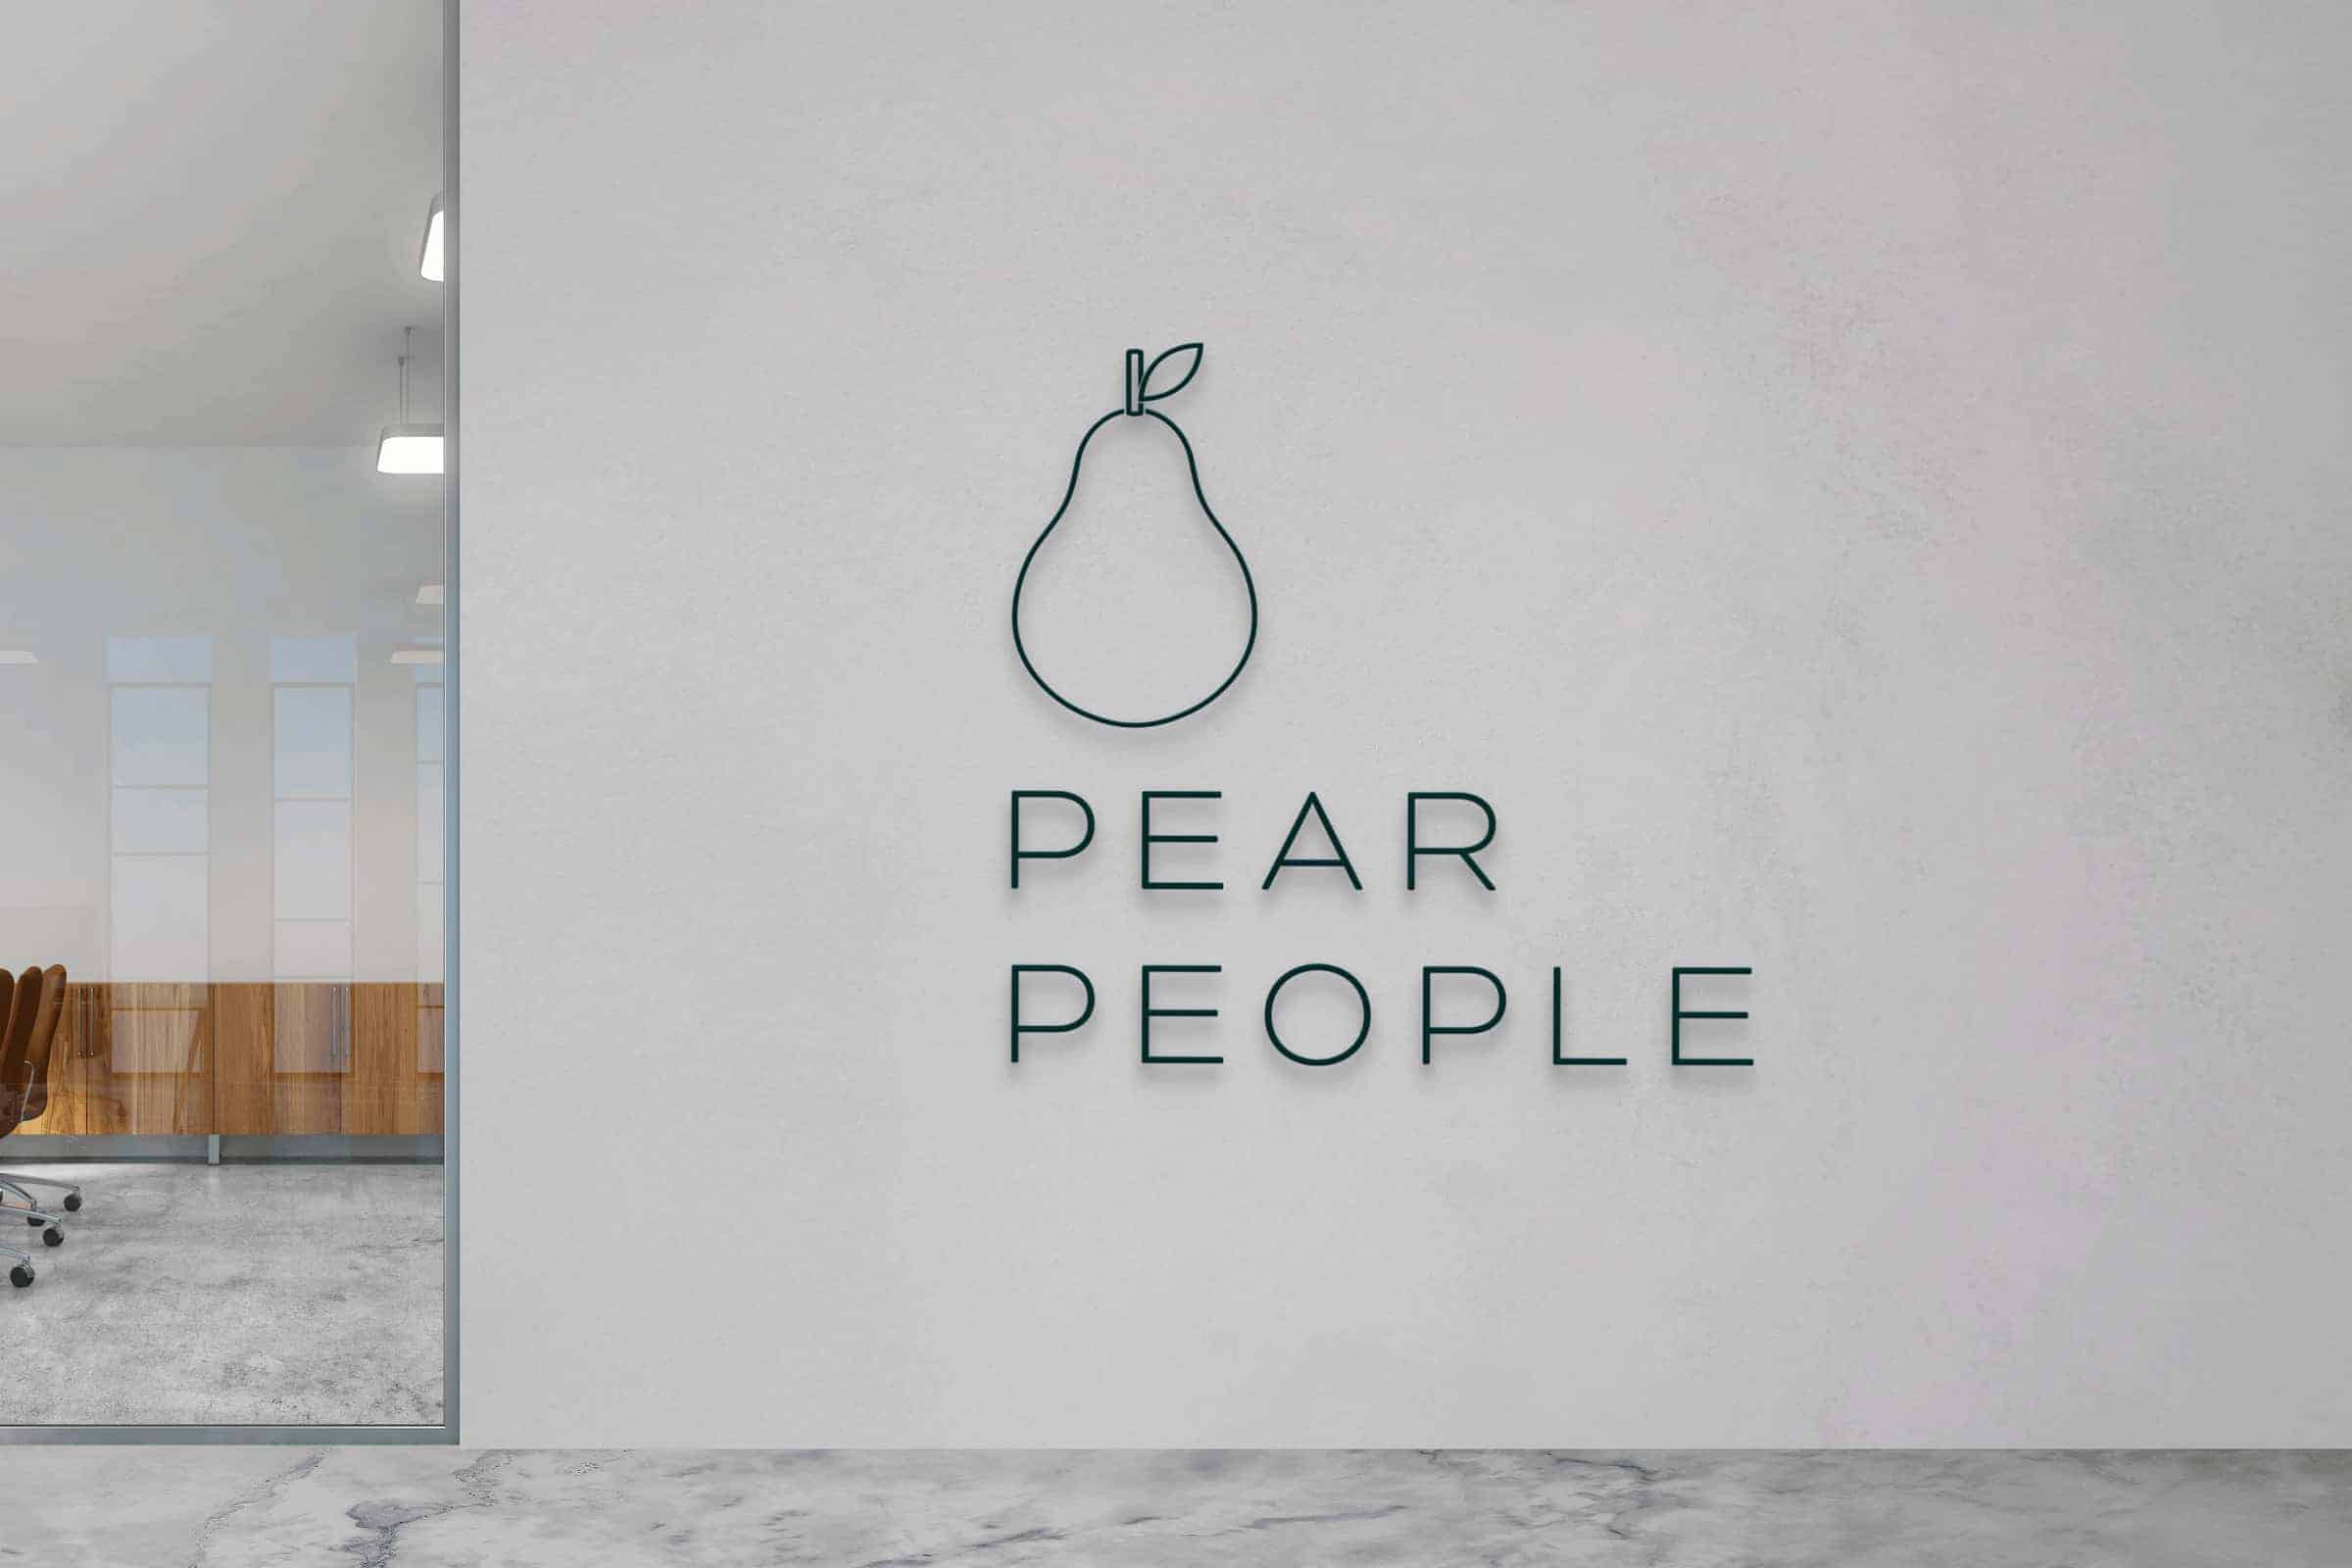 Seedling Digital's pear people logo represents their Gold Coast-based business in Australia.